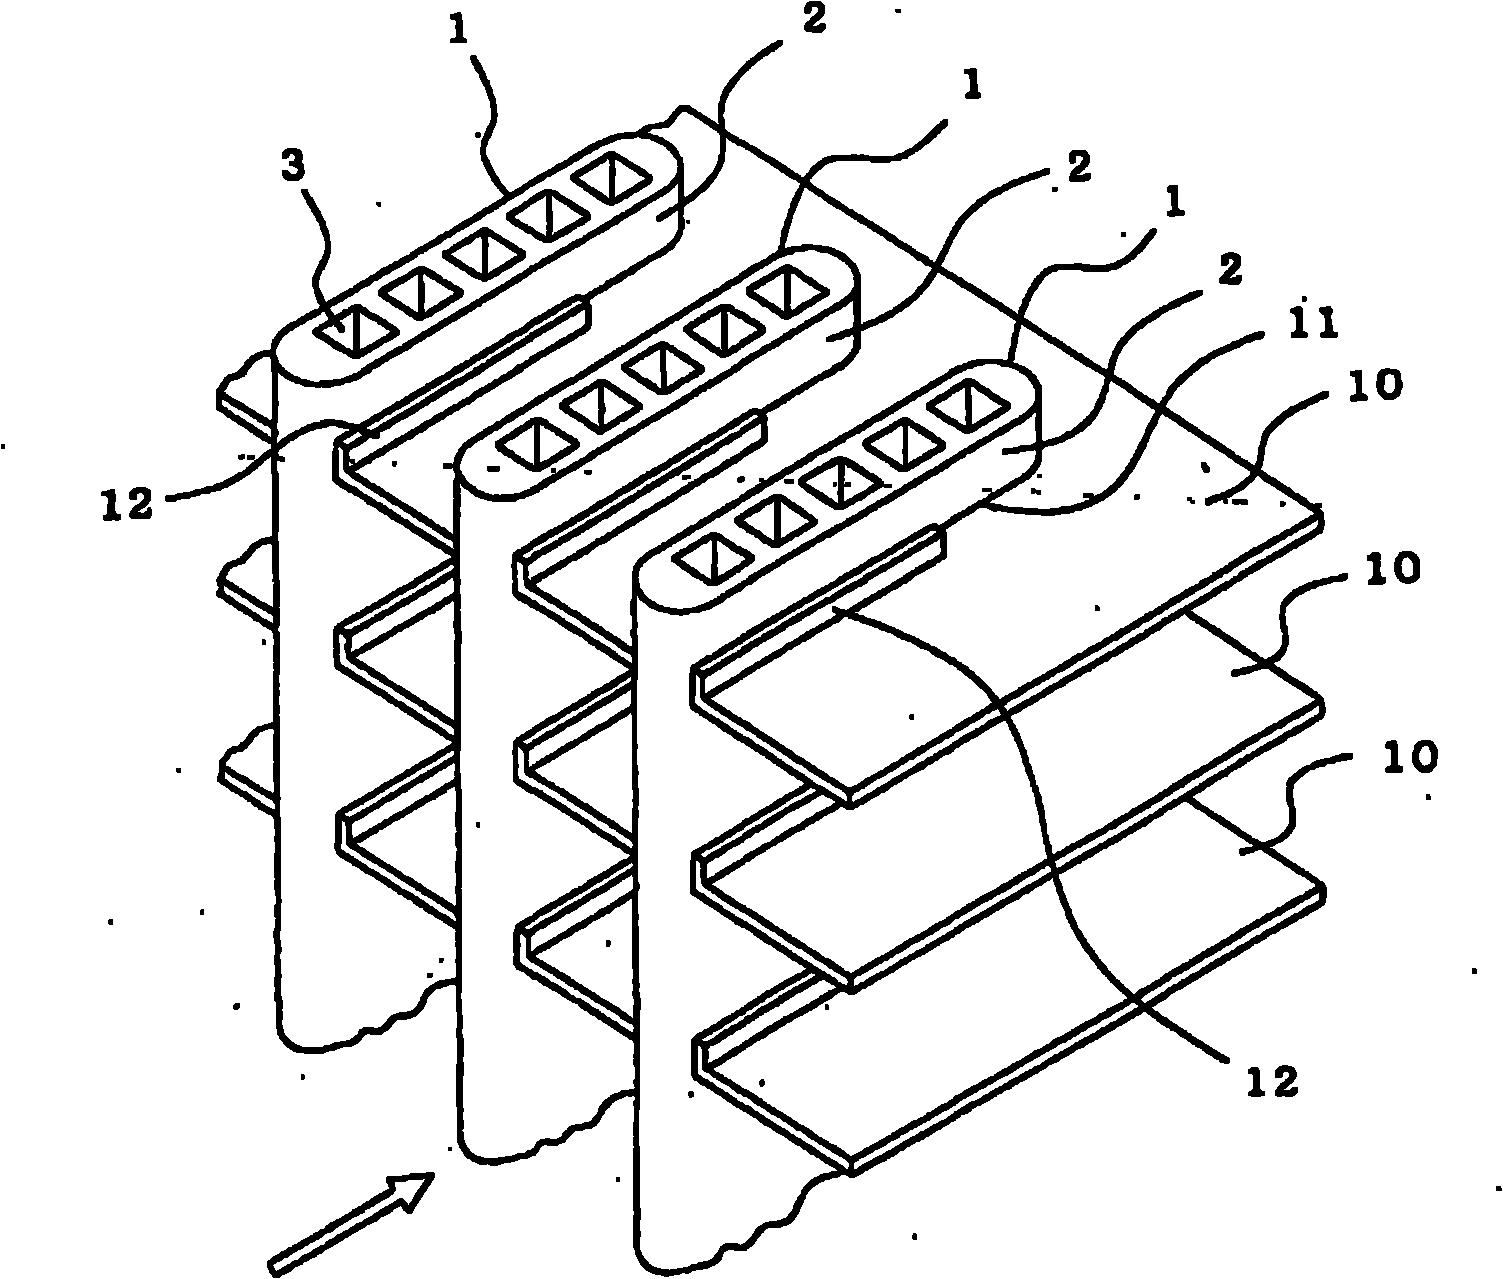 Heat exchanger, method of manufacturing a heat exchanger and air conditioner with the heat exchanger